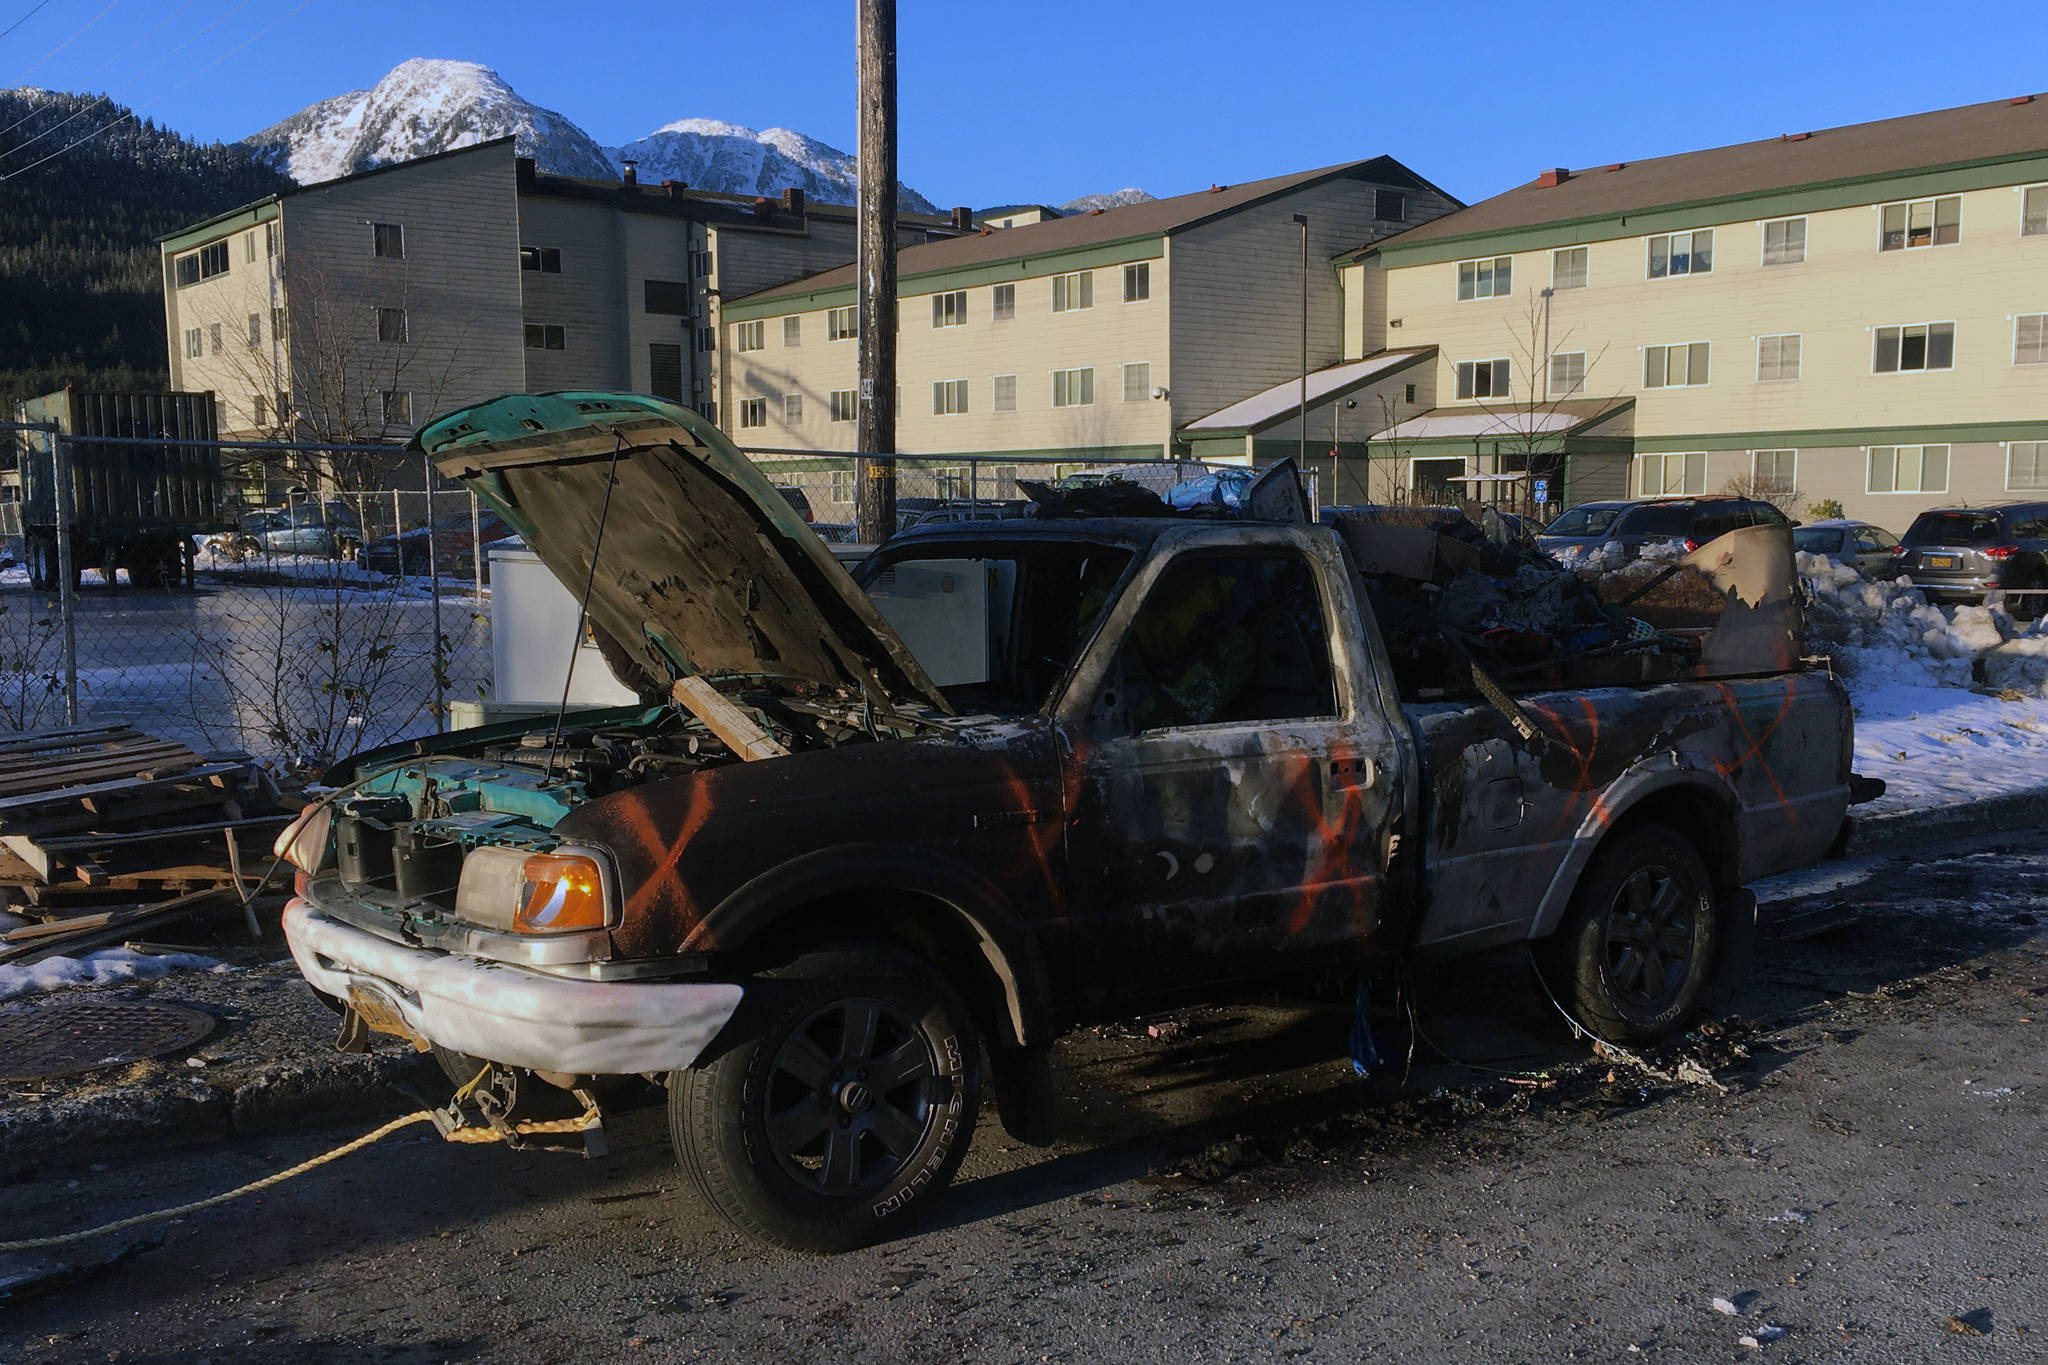 Capital City Fire/Rescue responded to a call at approximately 10 p.m. on Nov. 16, 2020 to a vehicle fire downtown. The vehicle, shown here the next morning, was located on F Street. (Michael S. Lockett / Juneau Empire)